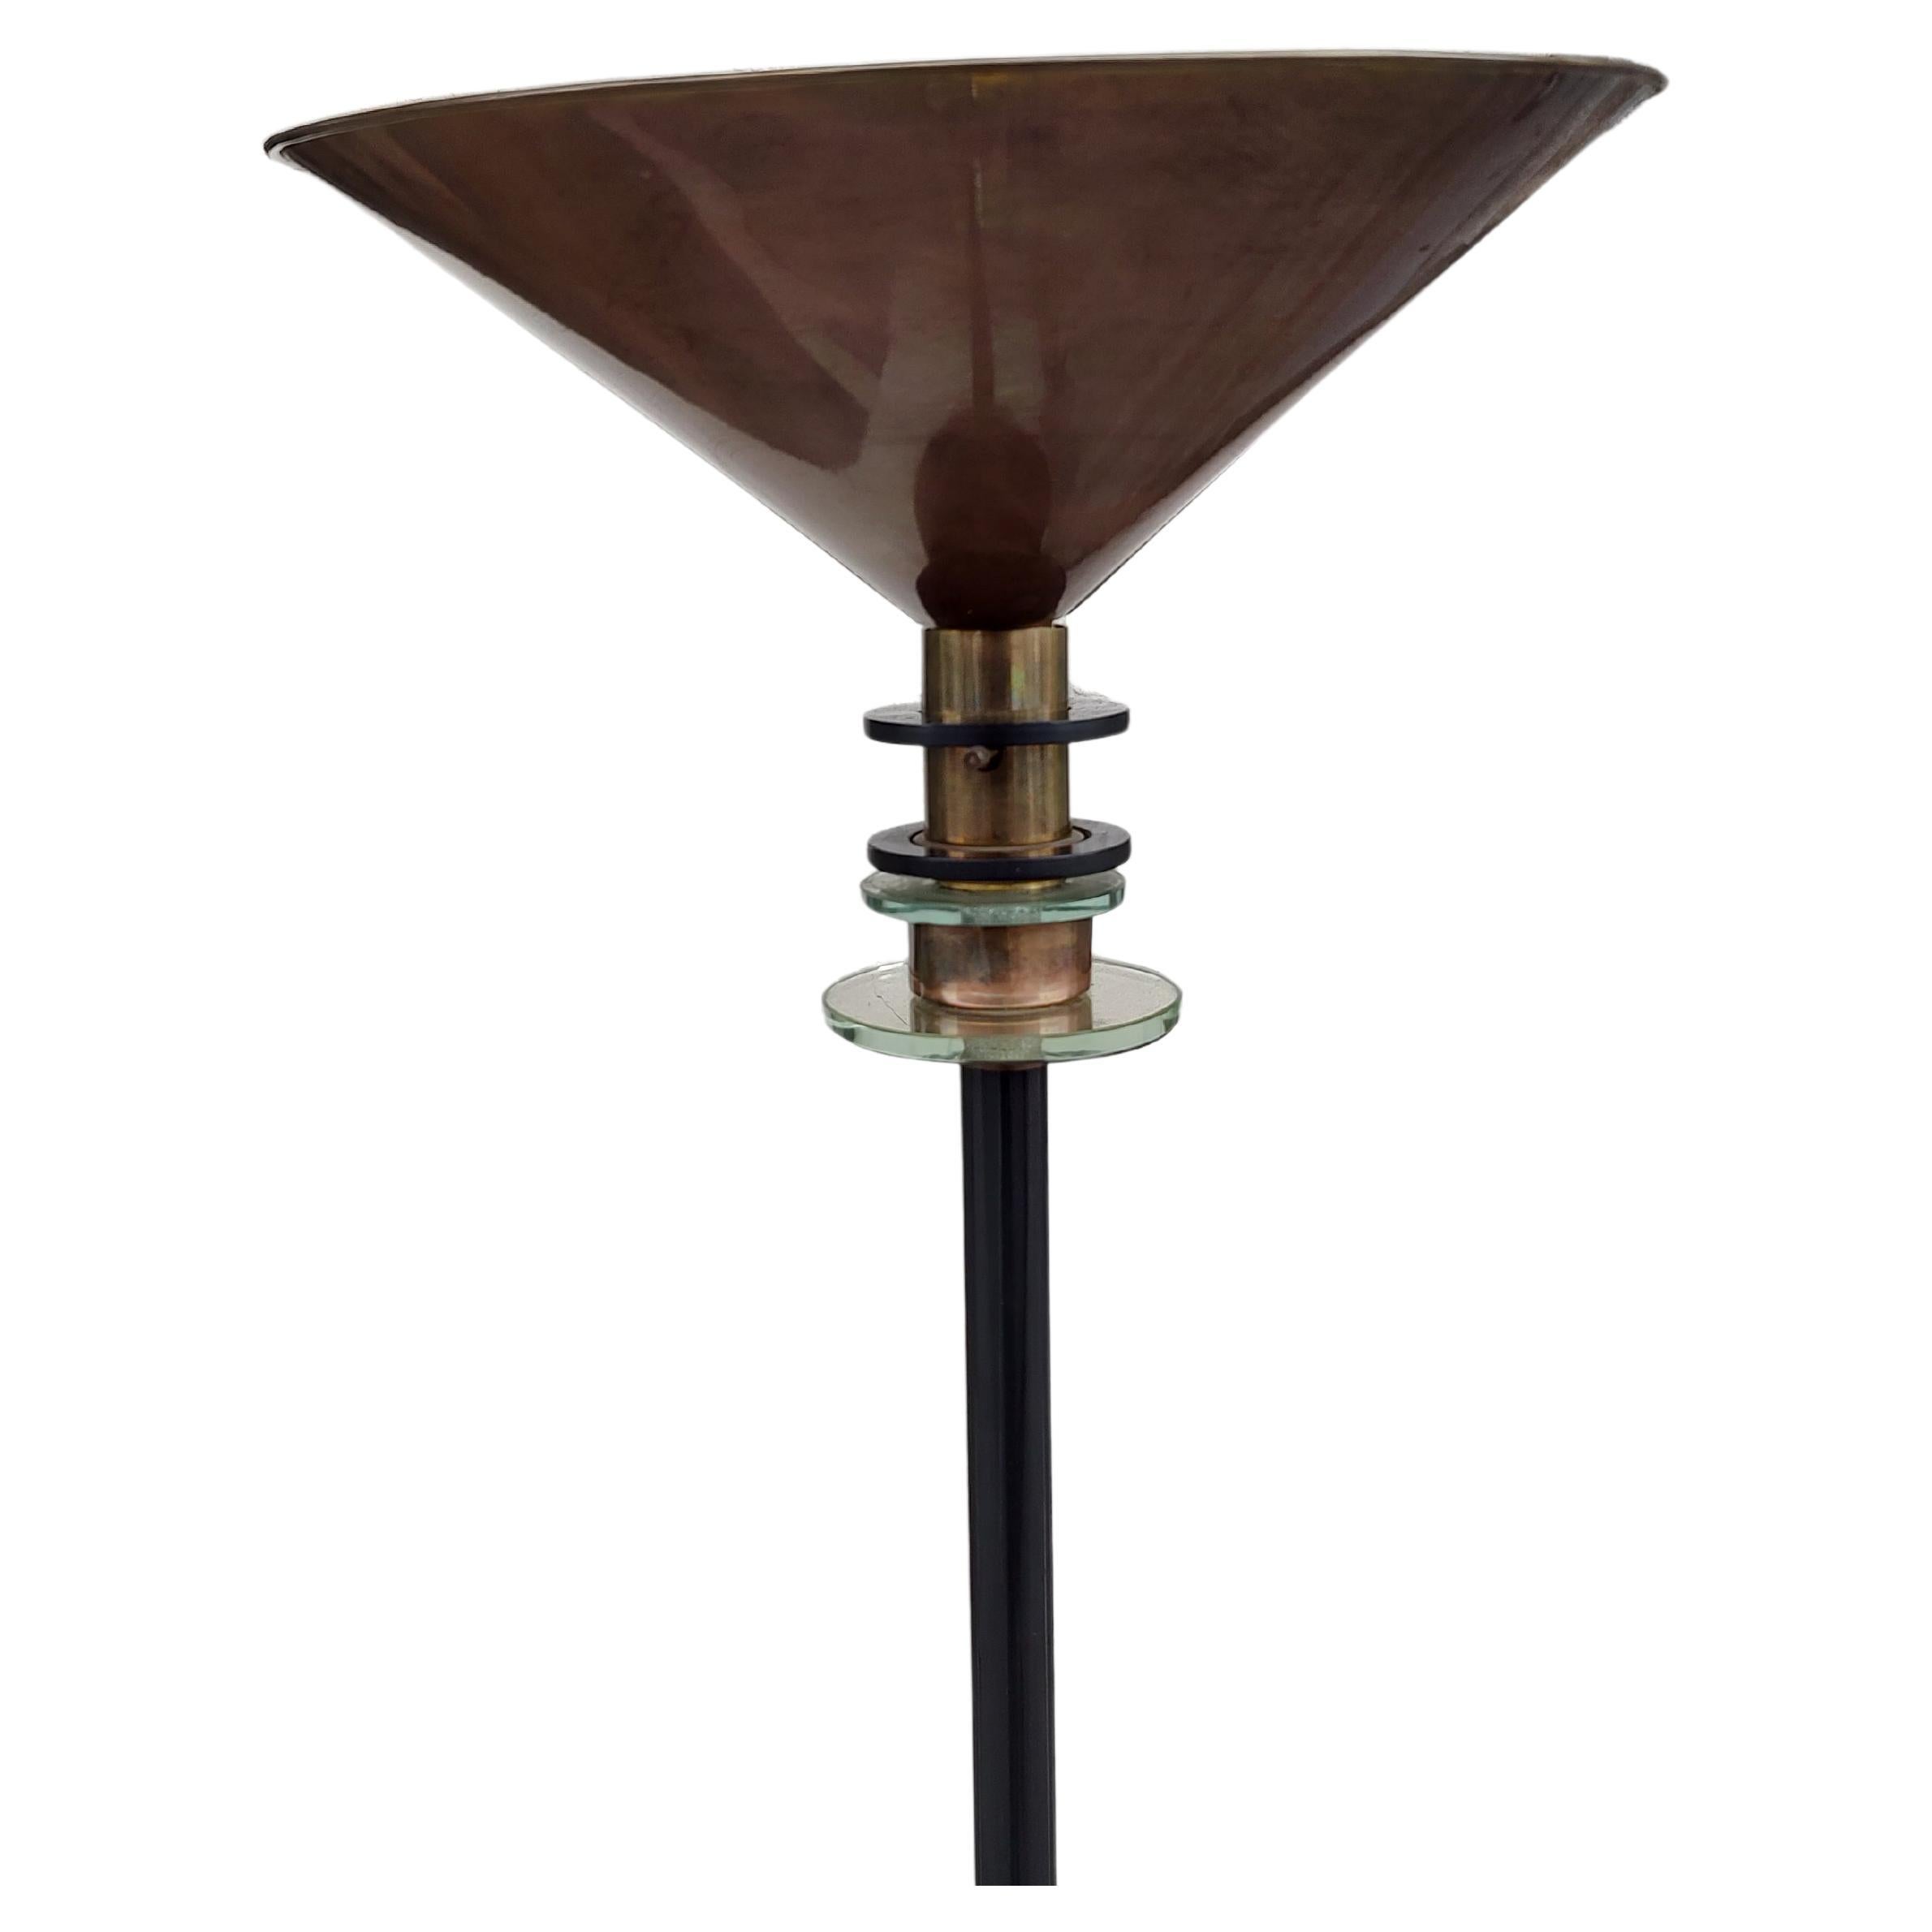 Mid-20th Century Art Deco Torchiere Floor Lamp with Stepped Mirror Design For Sale